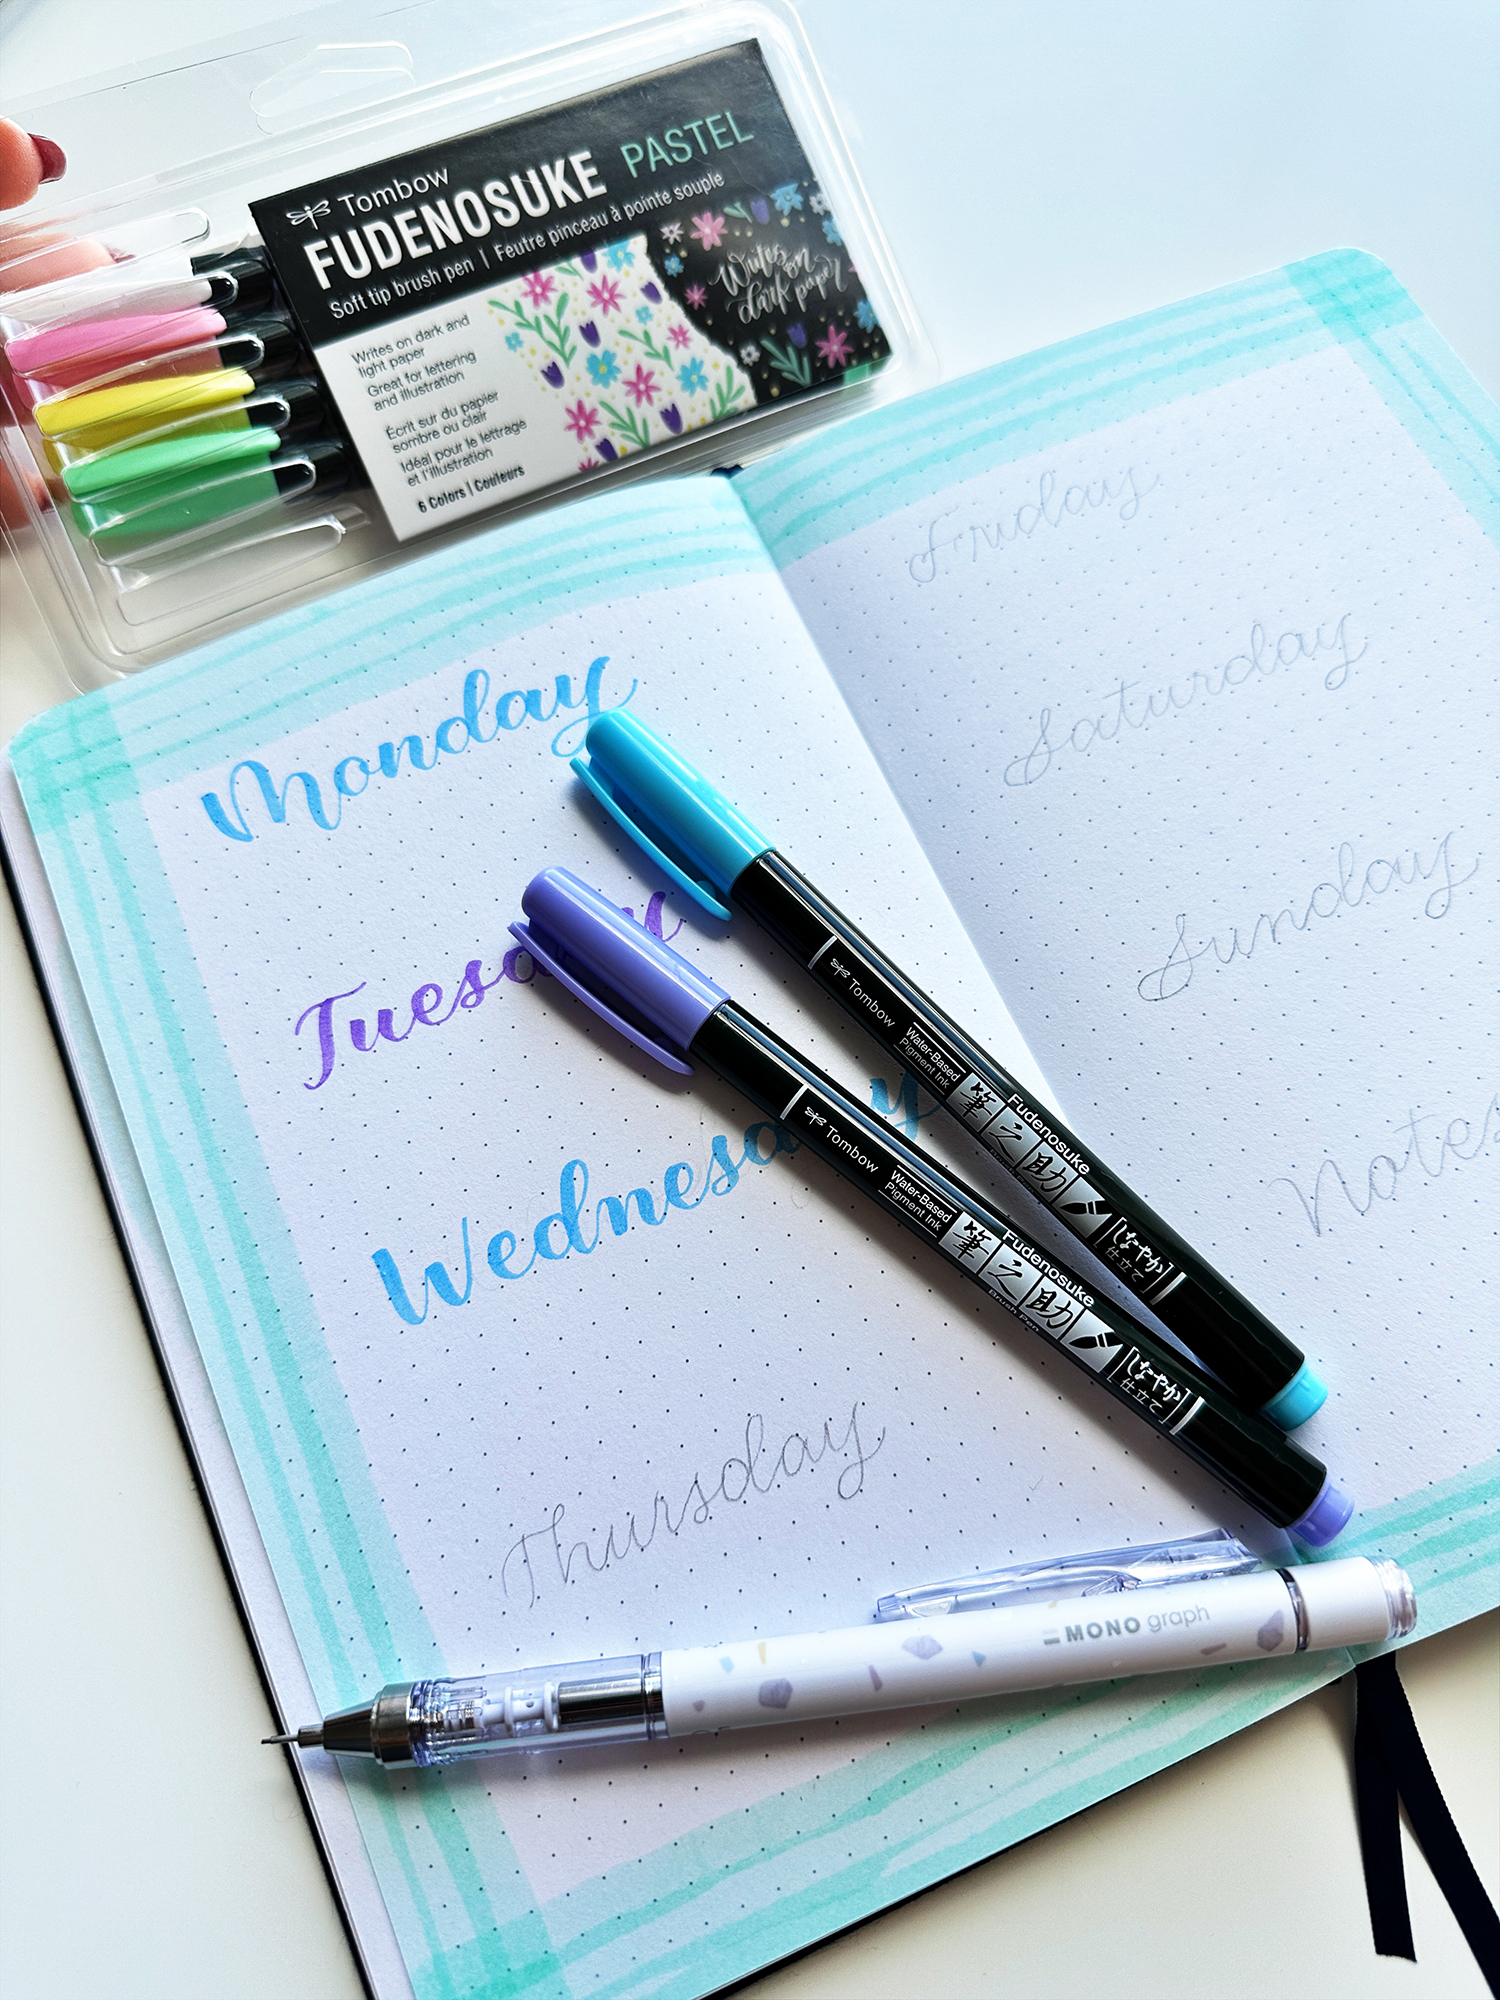 Use a pencil to lightly sketch the days of the week. Then use an eraser to make the pencil marks even lighter. To letter the days, I used the Tombow Fudenosuke Pastel Brush Pens. Let the ink dry and then use an eraser to erase any remaining eraser lines. #tombow #journaling